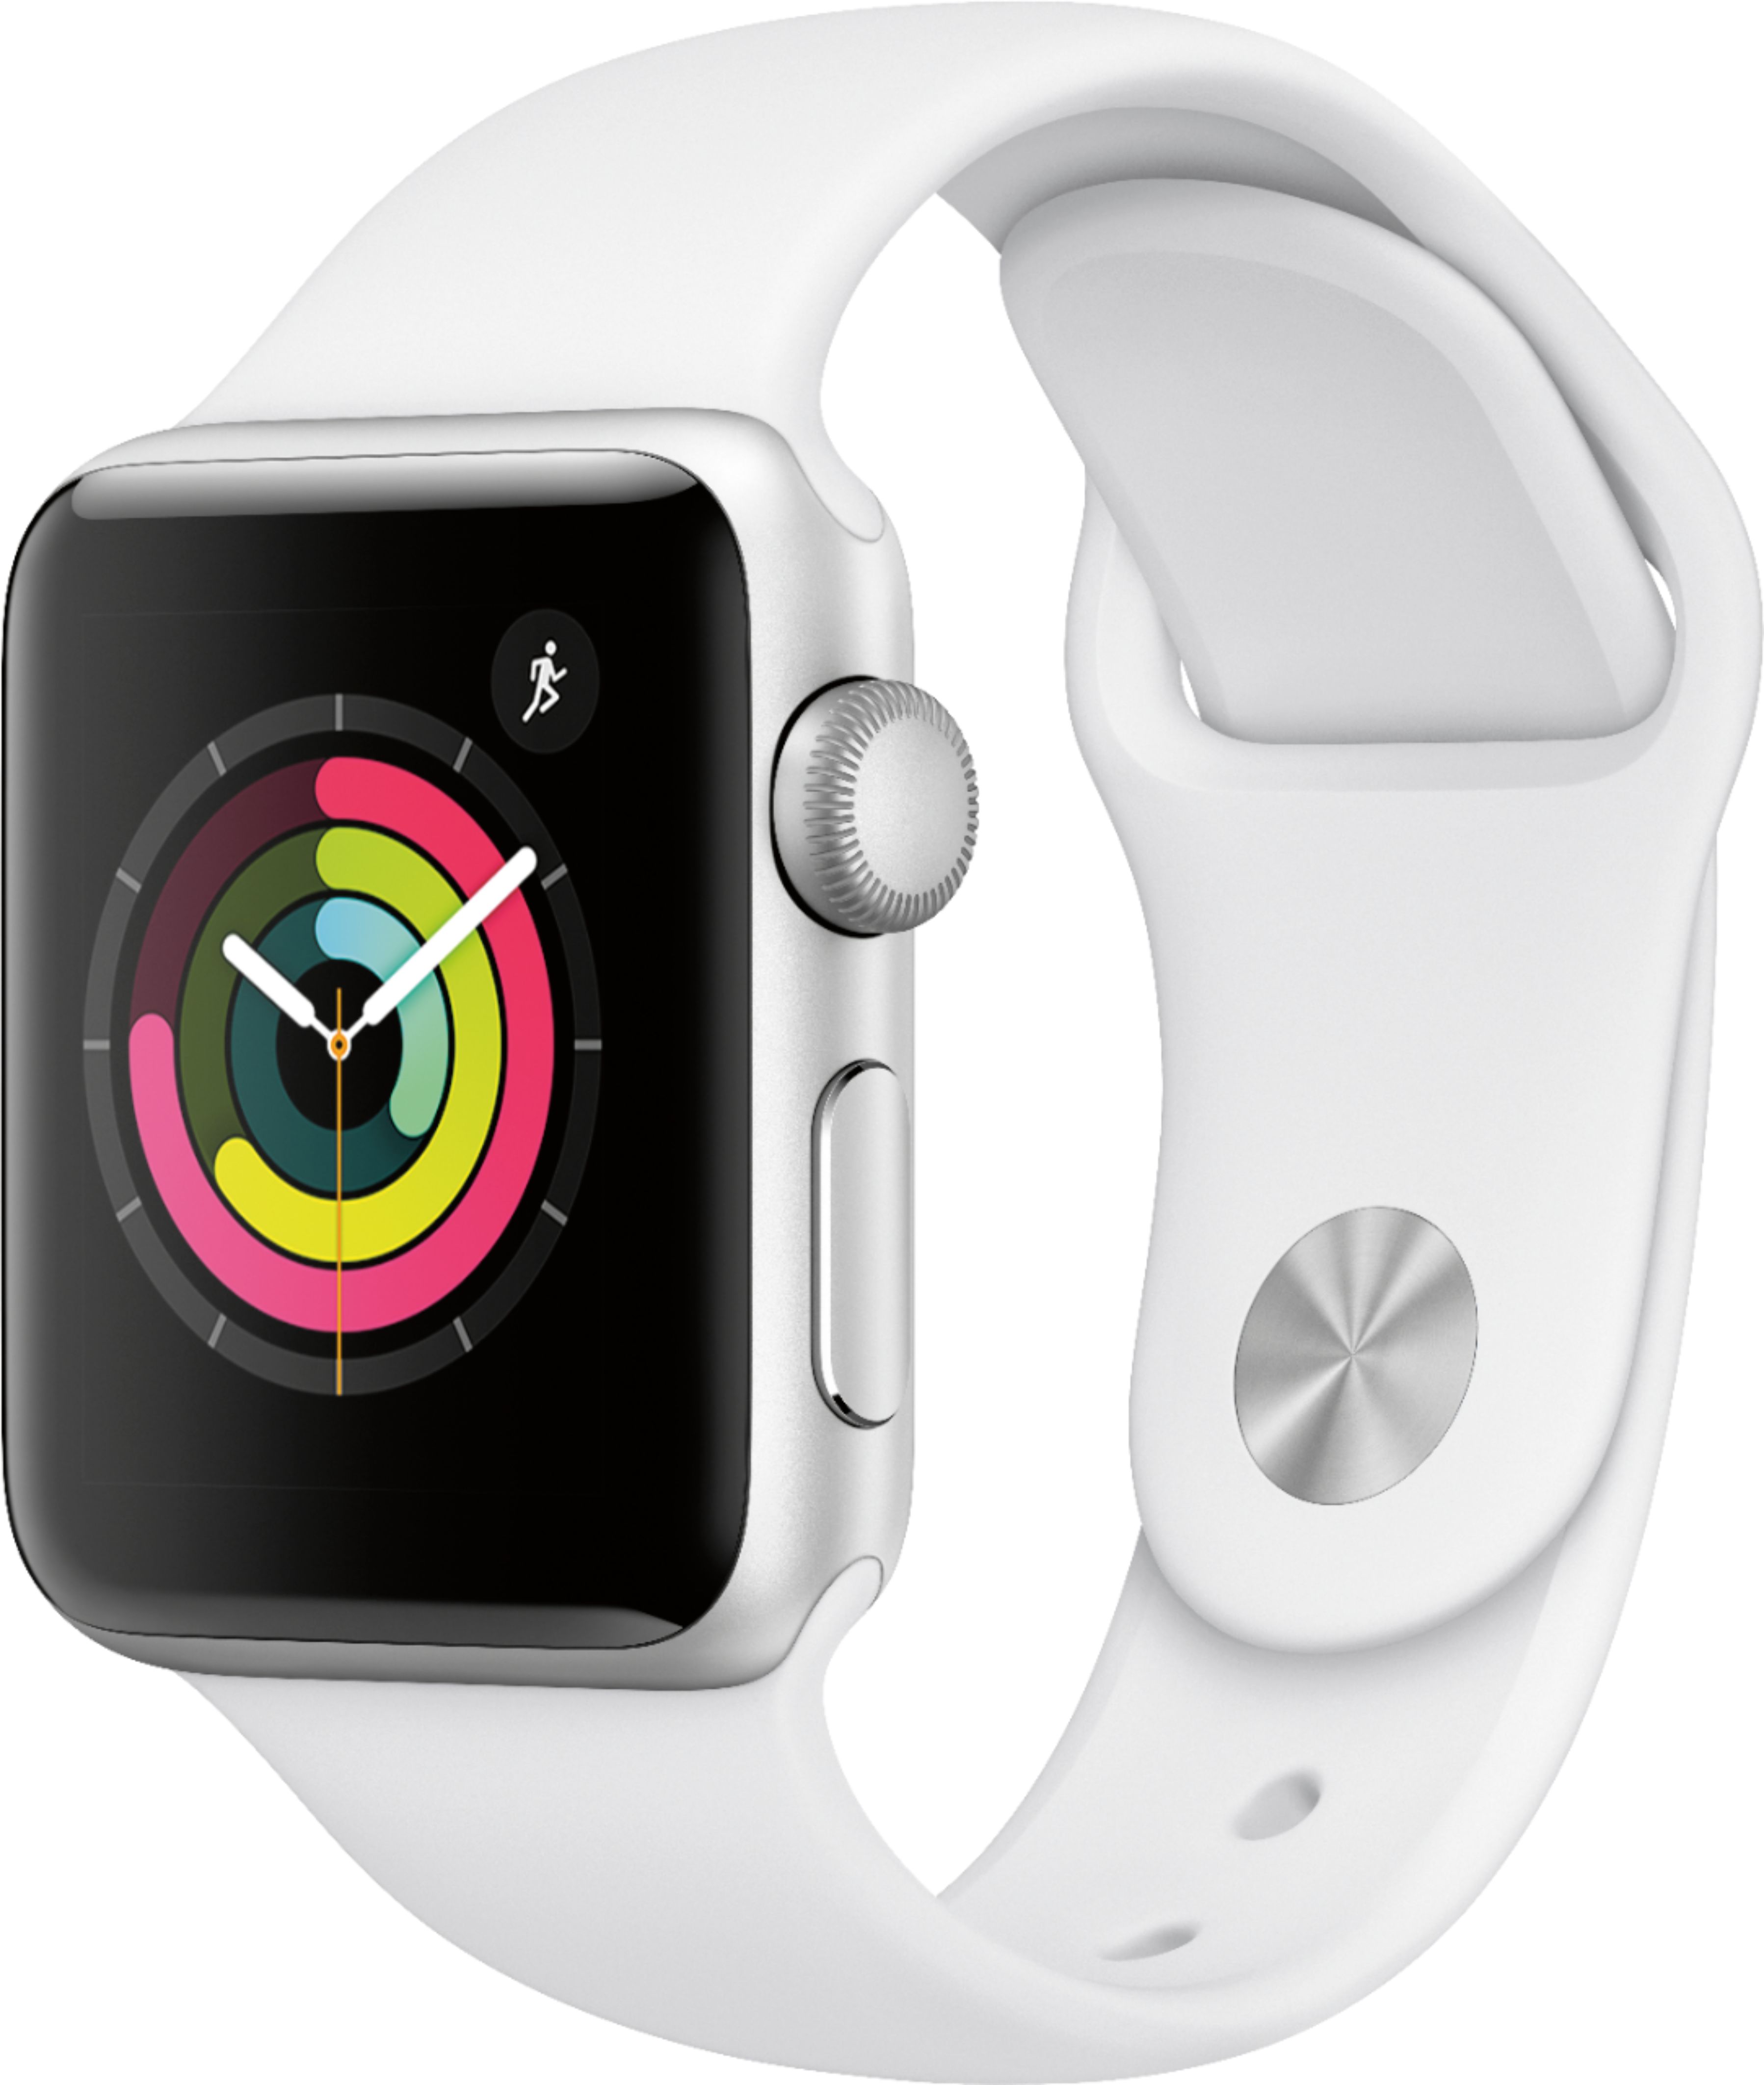 Apple Watch Series 3 (GPS) 38mm Aluminum Case with White Sport Band Silver  Aluminum MTEY2LL/A - Best Buy